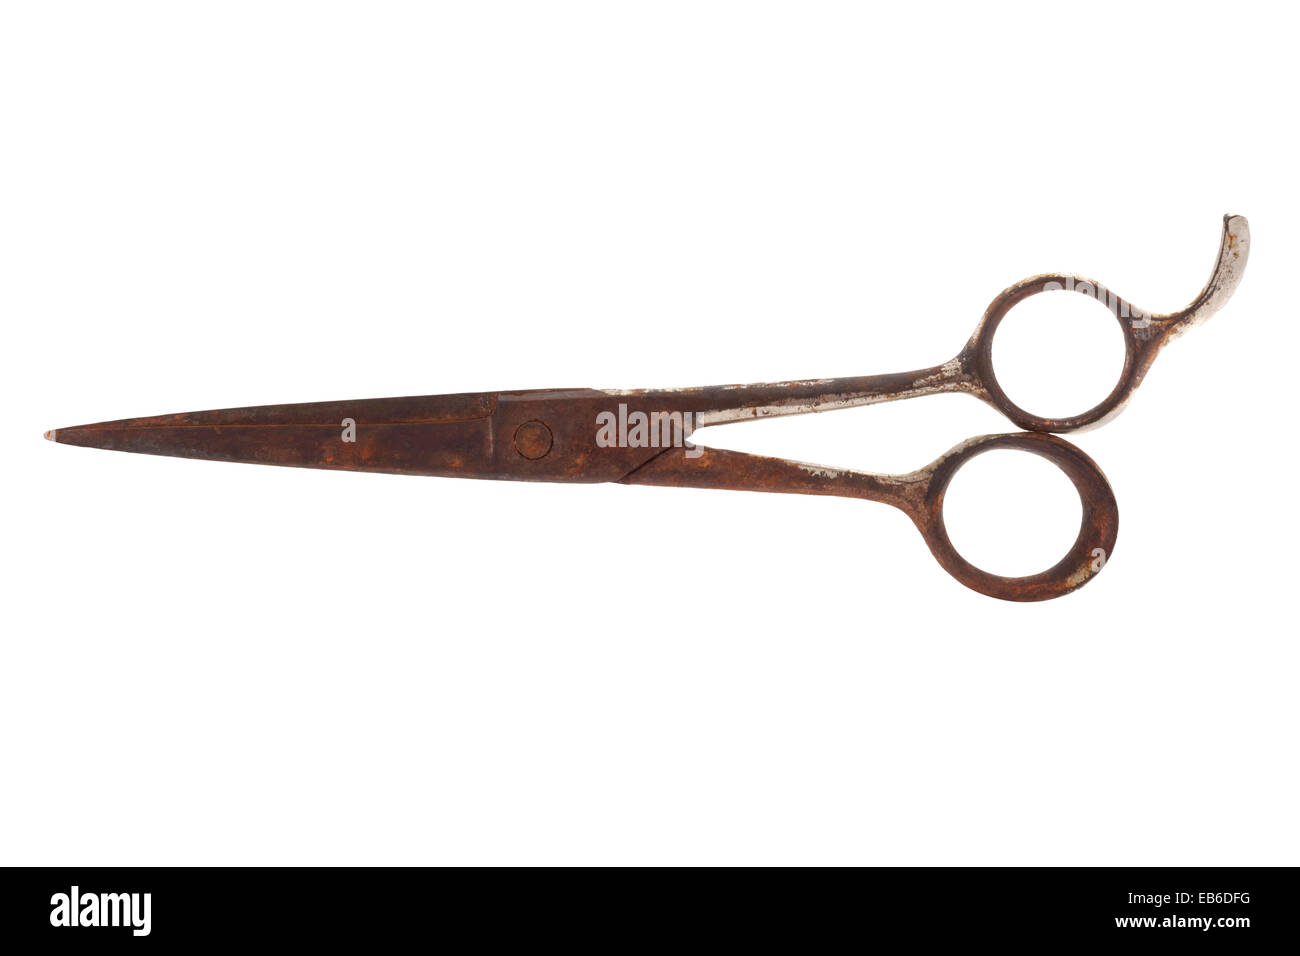 Old rusty hairdressing scissors on white background Stock Photo